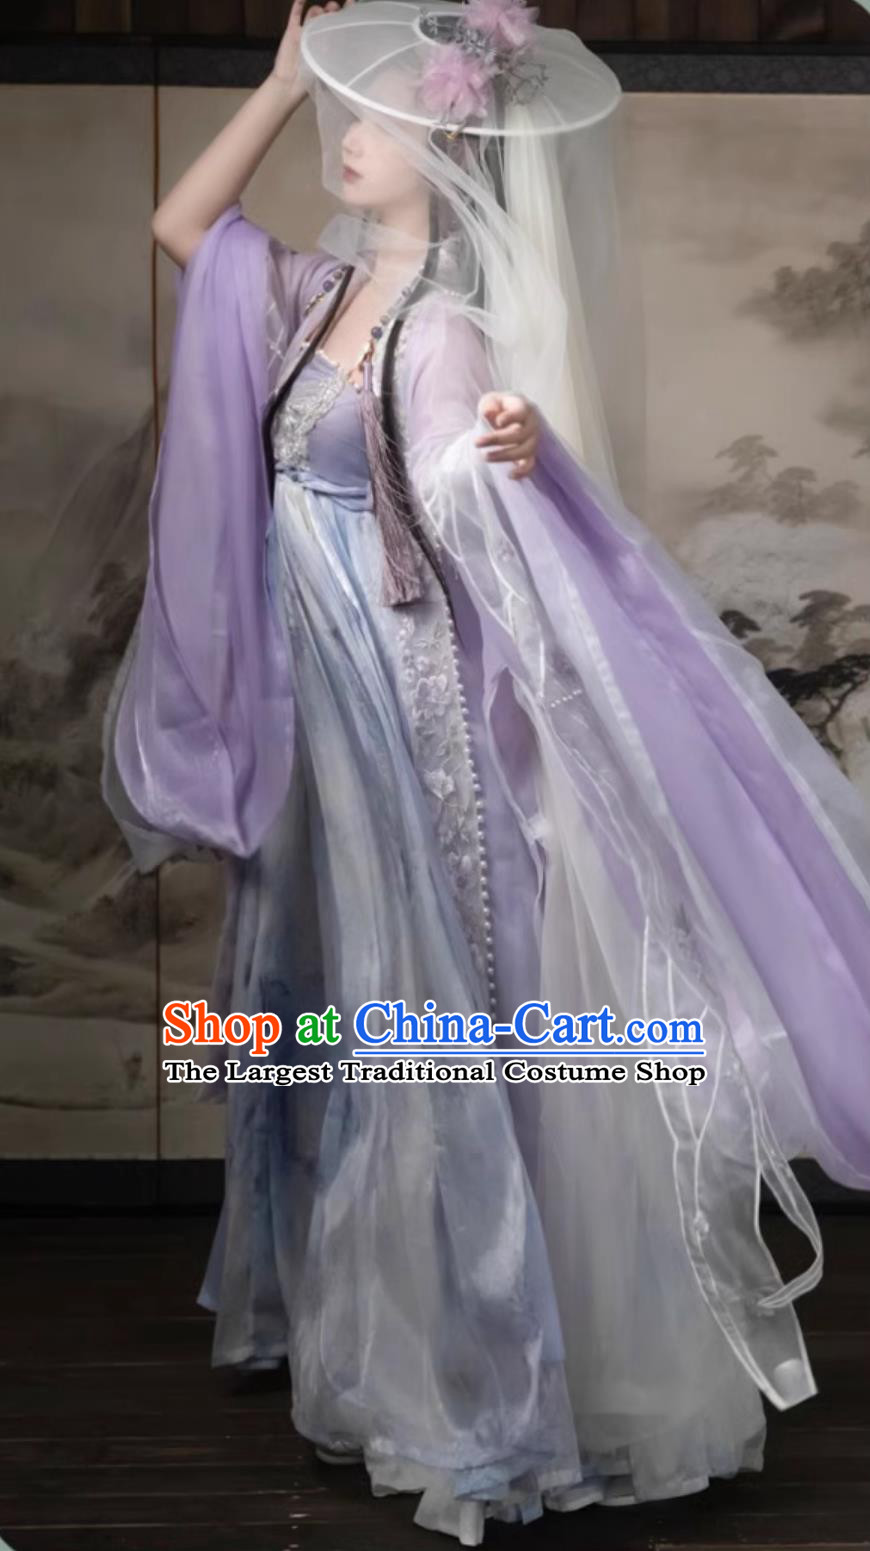 Ancient Chinese Clothing Tang Dynasty Princess Purple Dress Traditional Hanfu Online Shop